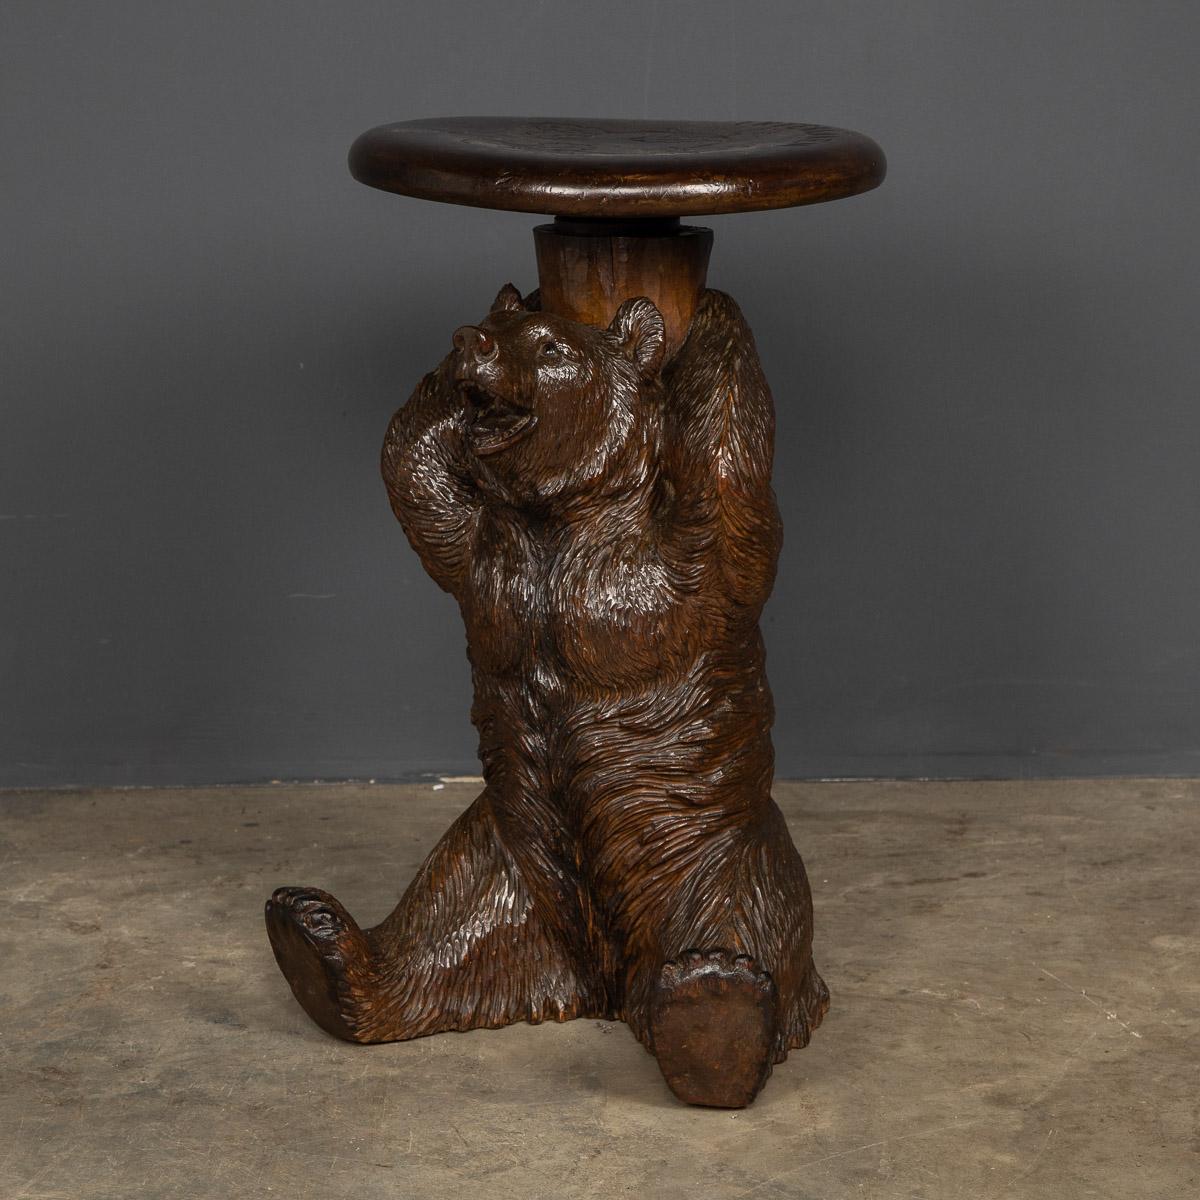 Antique 19th Century German Black Forest carved seated bear holding up a stool, set with glass eyes. Such items were usually bought back by tourists from the Swiss / German borders (the Black Forest) and were a fashionable home decoration accessory